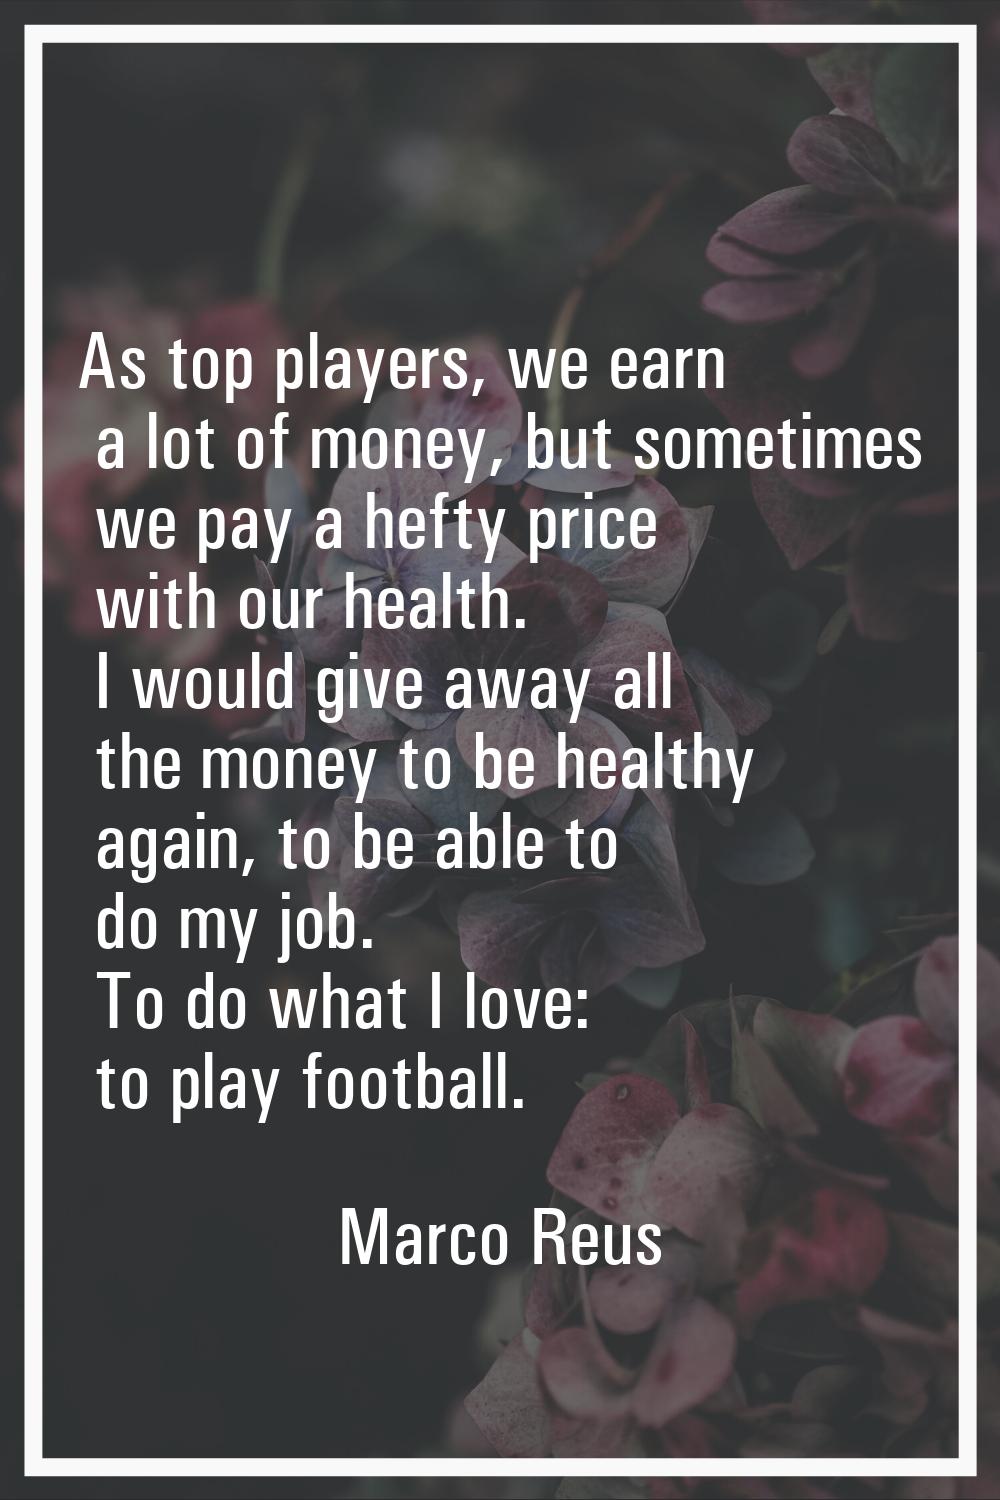 As top players, we earn a lot of money, but sometimes we pay a hefty price with our health. I would